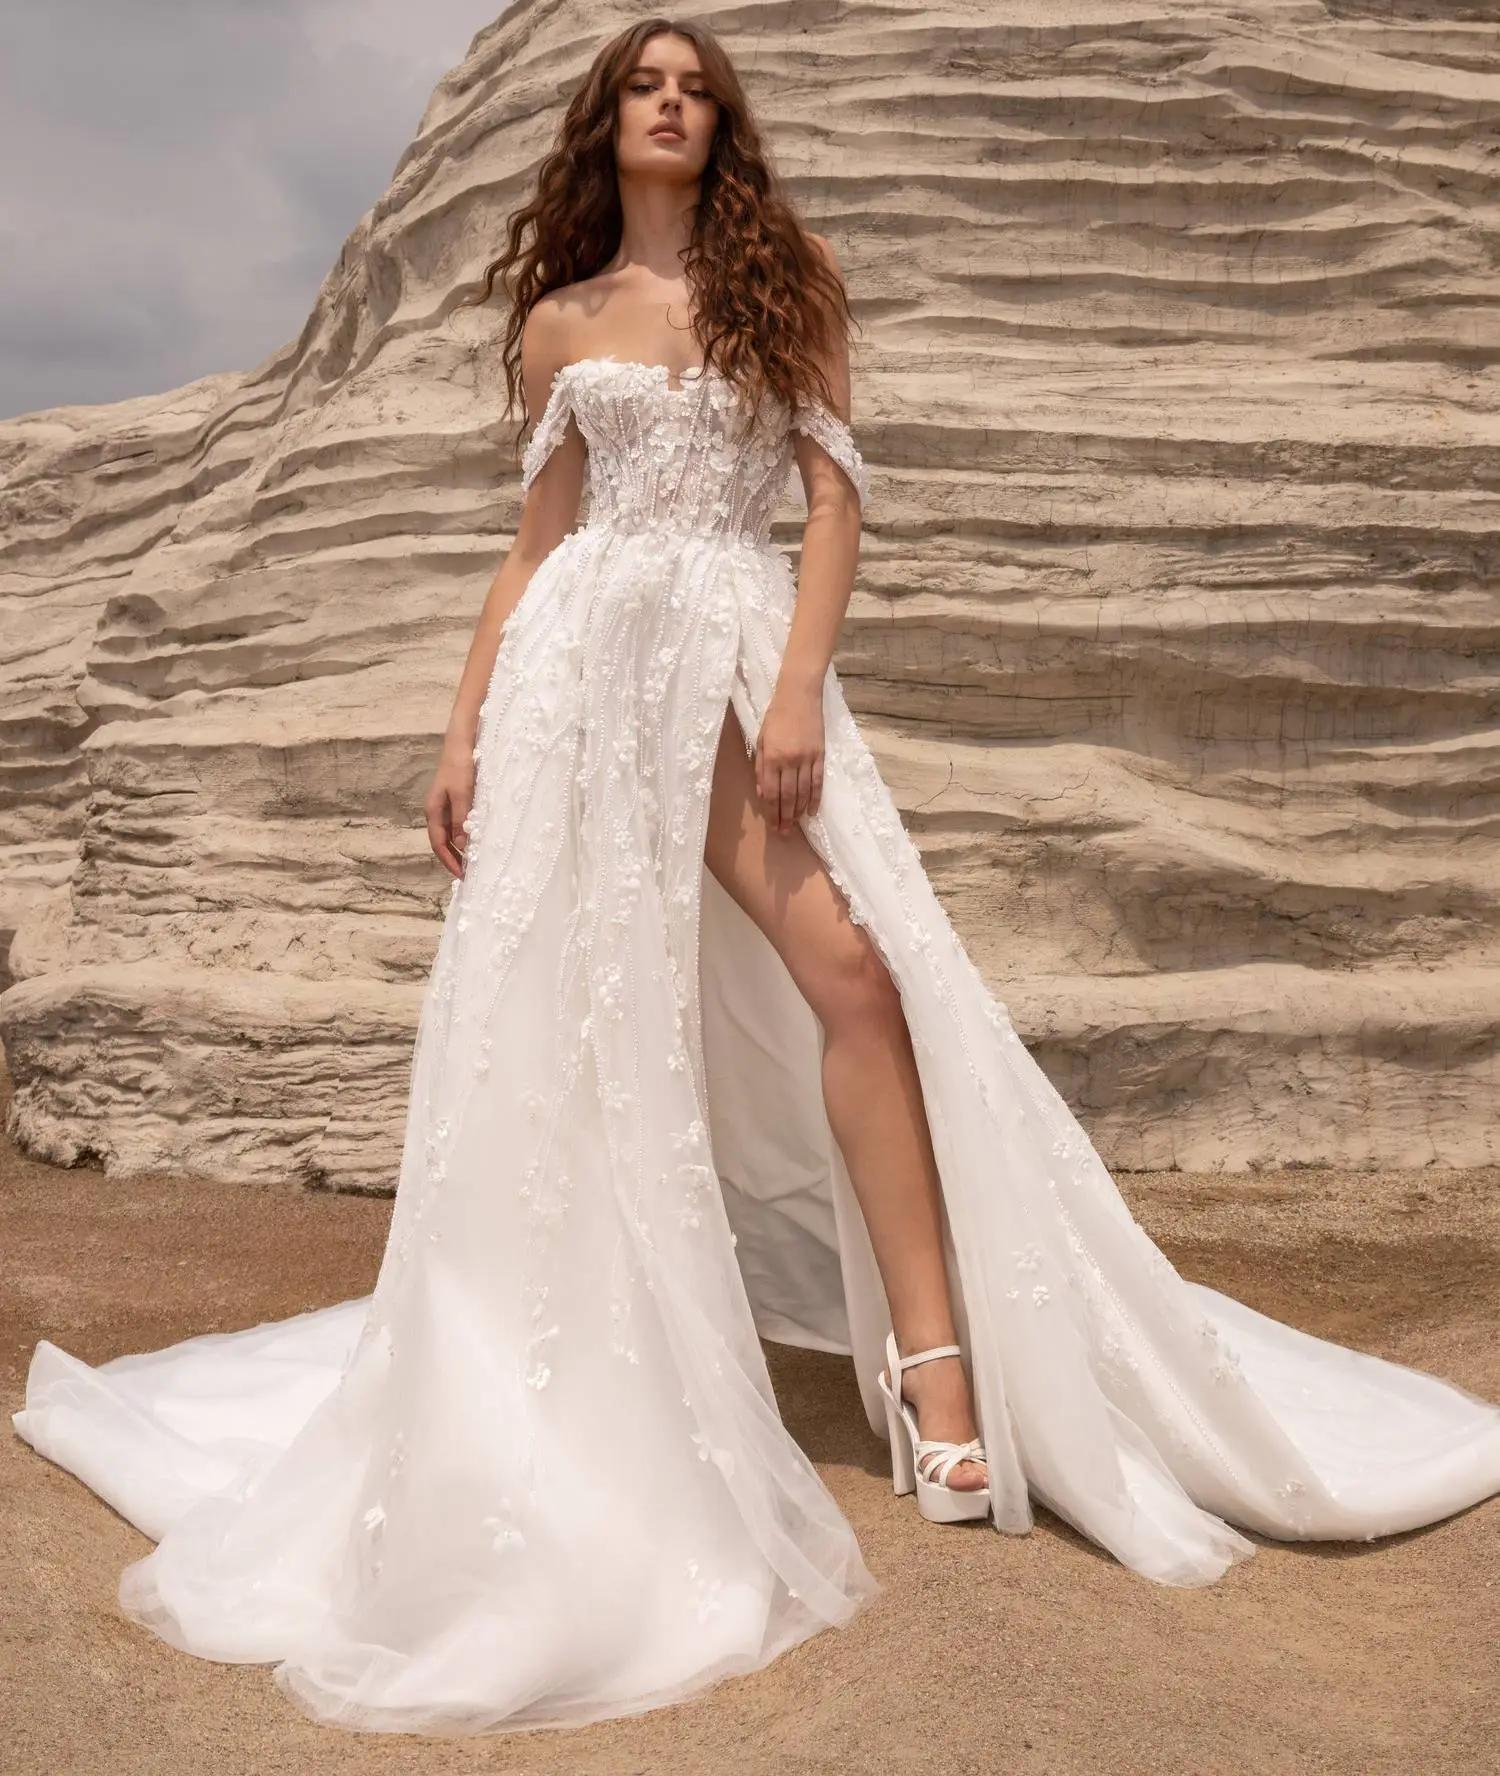 Dany Tabet Sirocco Collection Trunk Show Main Image